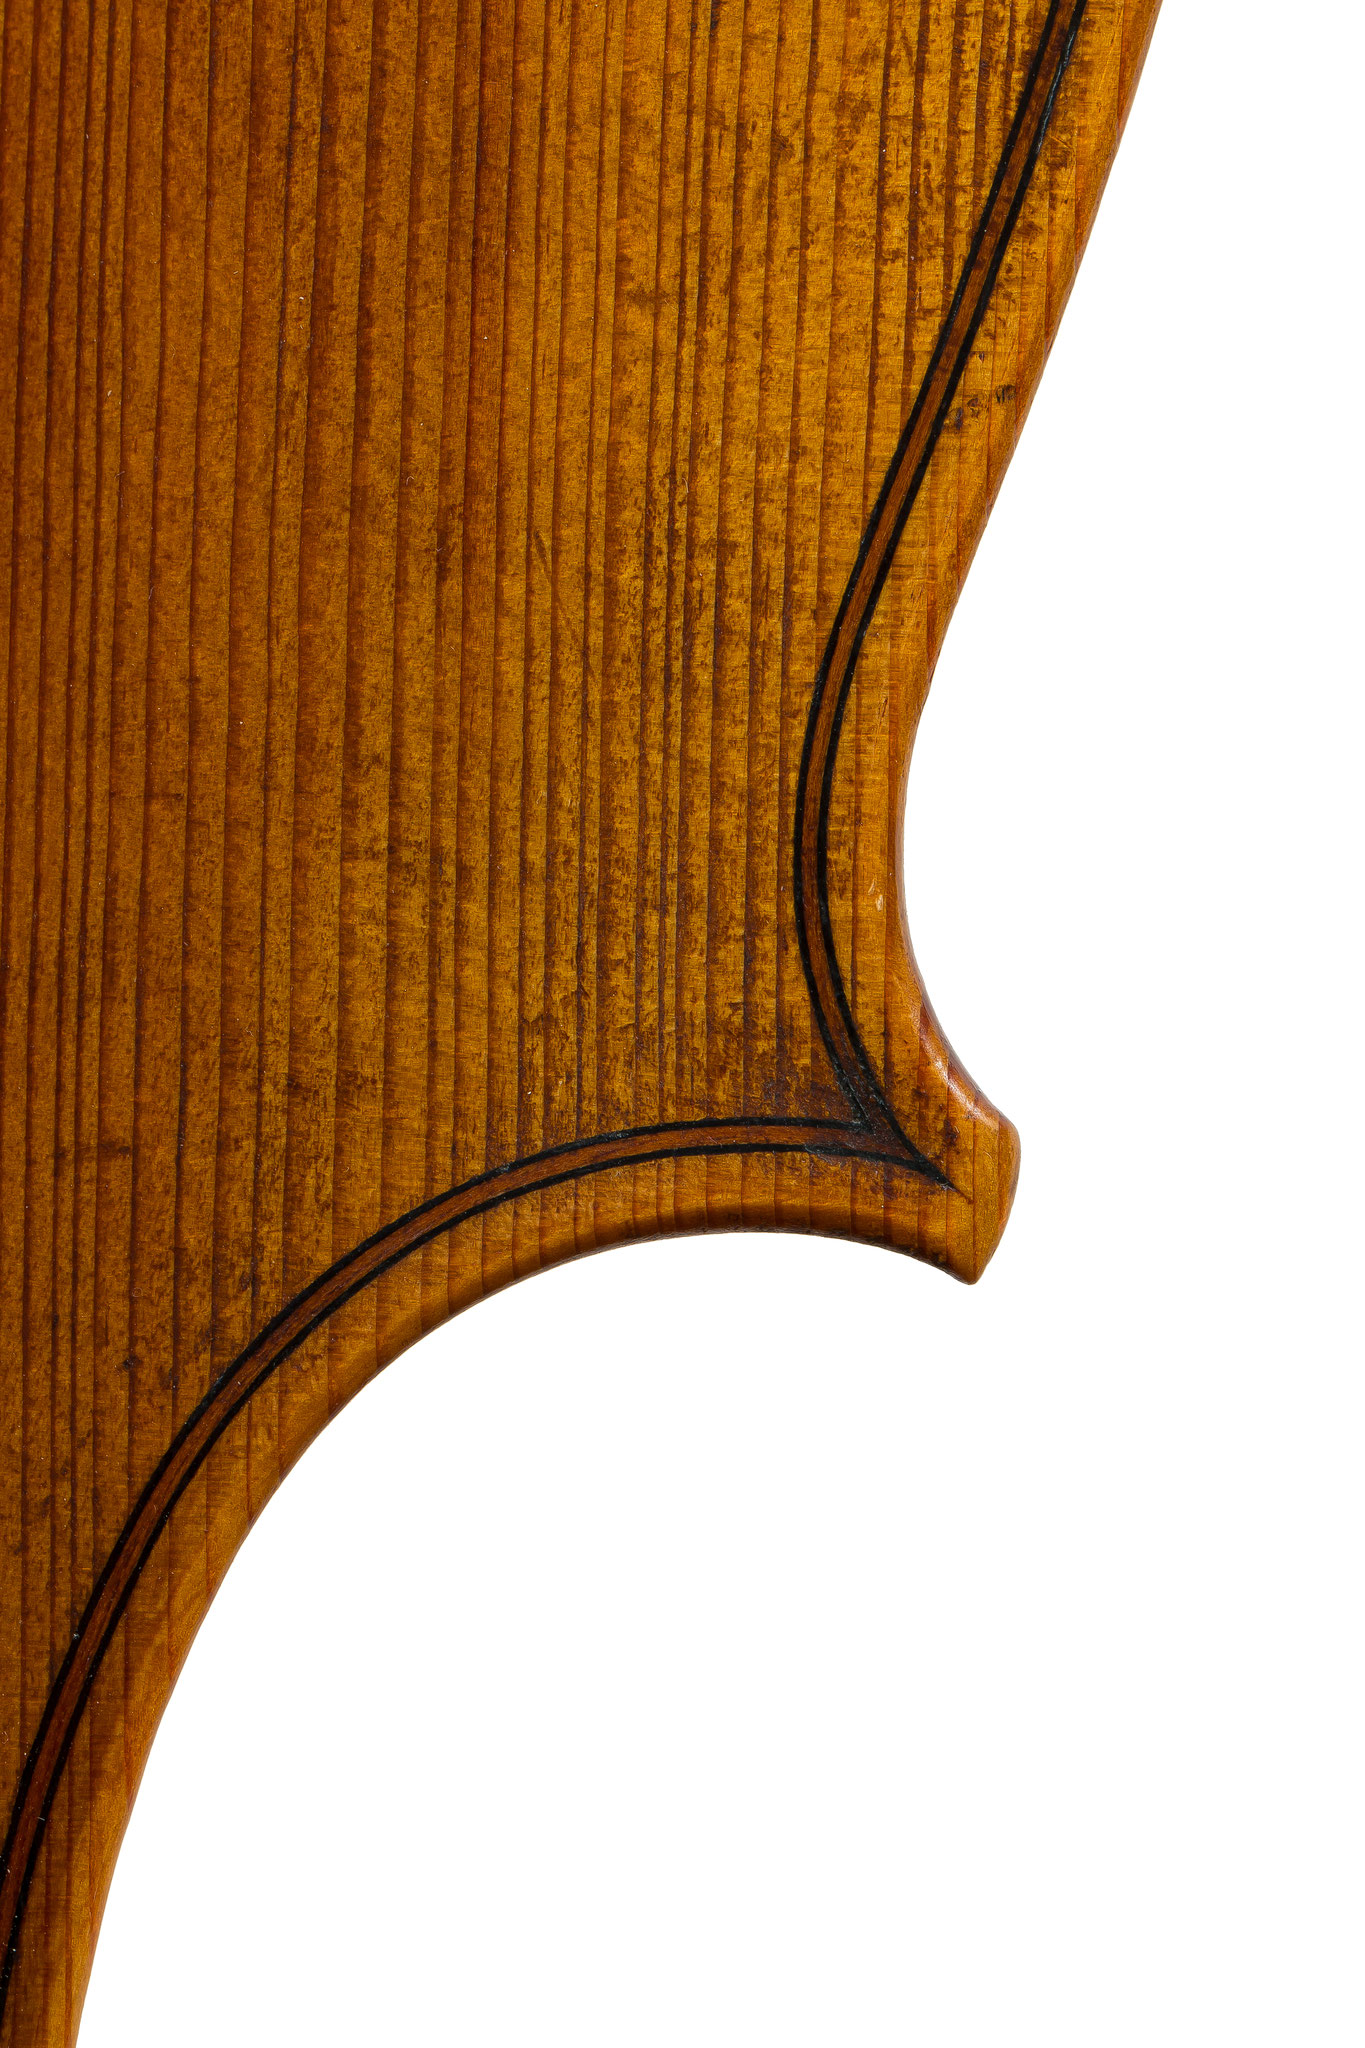 Baroque cello after Jacobus Stainer (2014/VD), Photo: VDB Photography